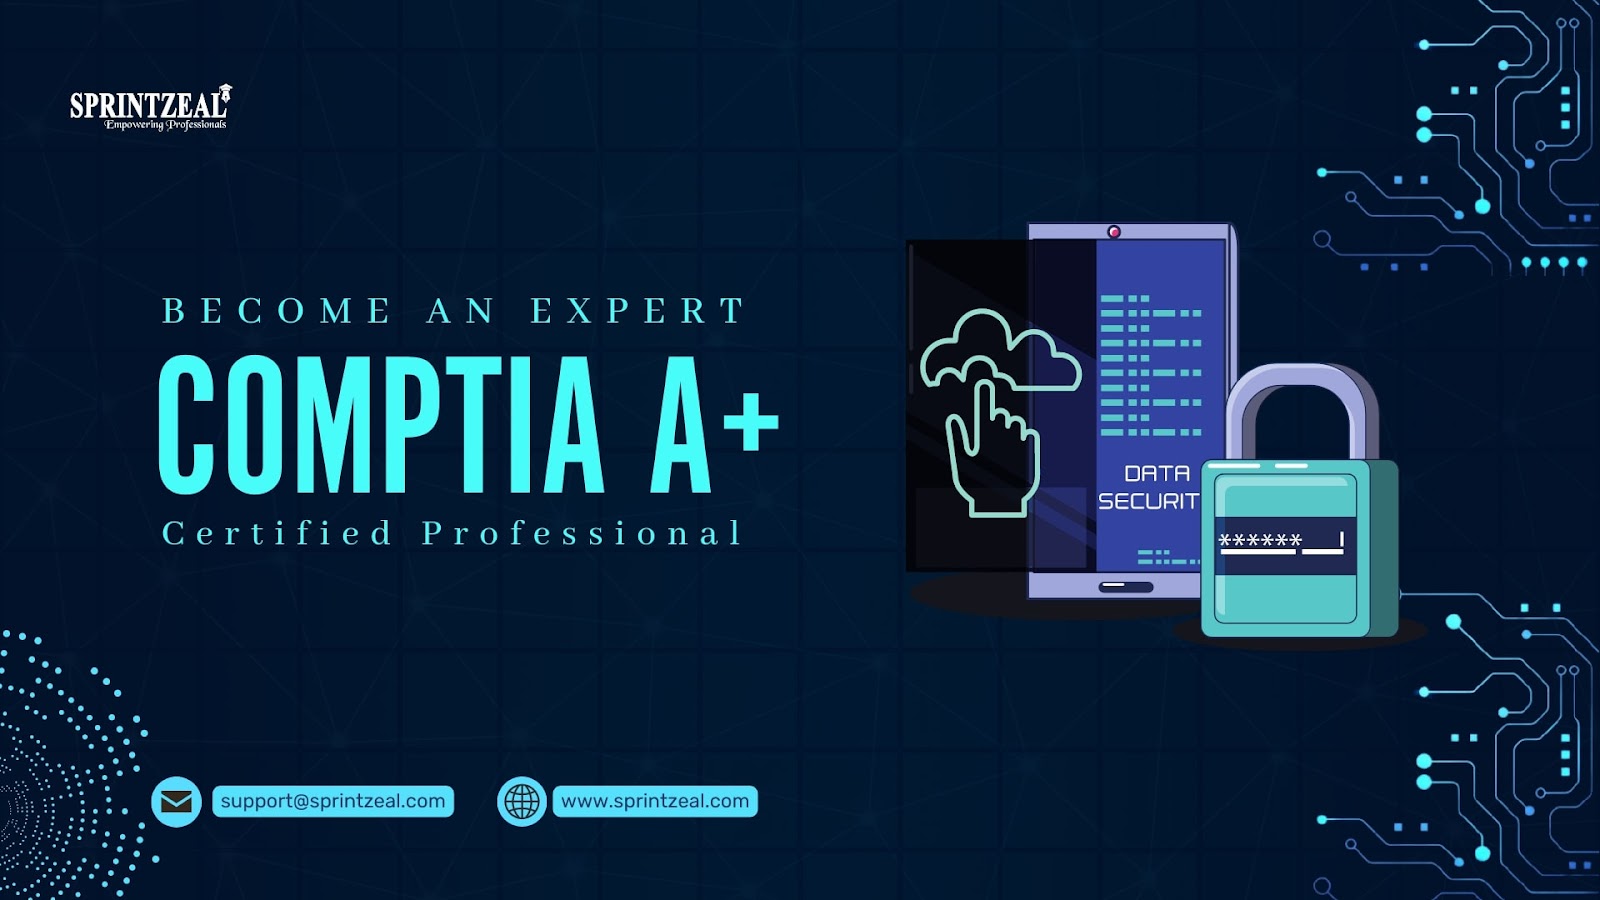 Career Options with CompTIA A+ Certification